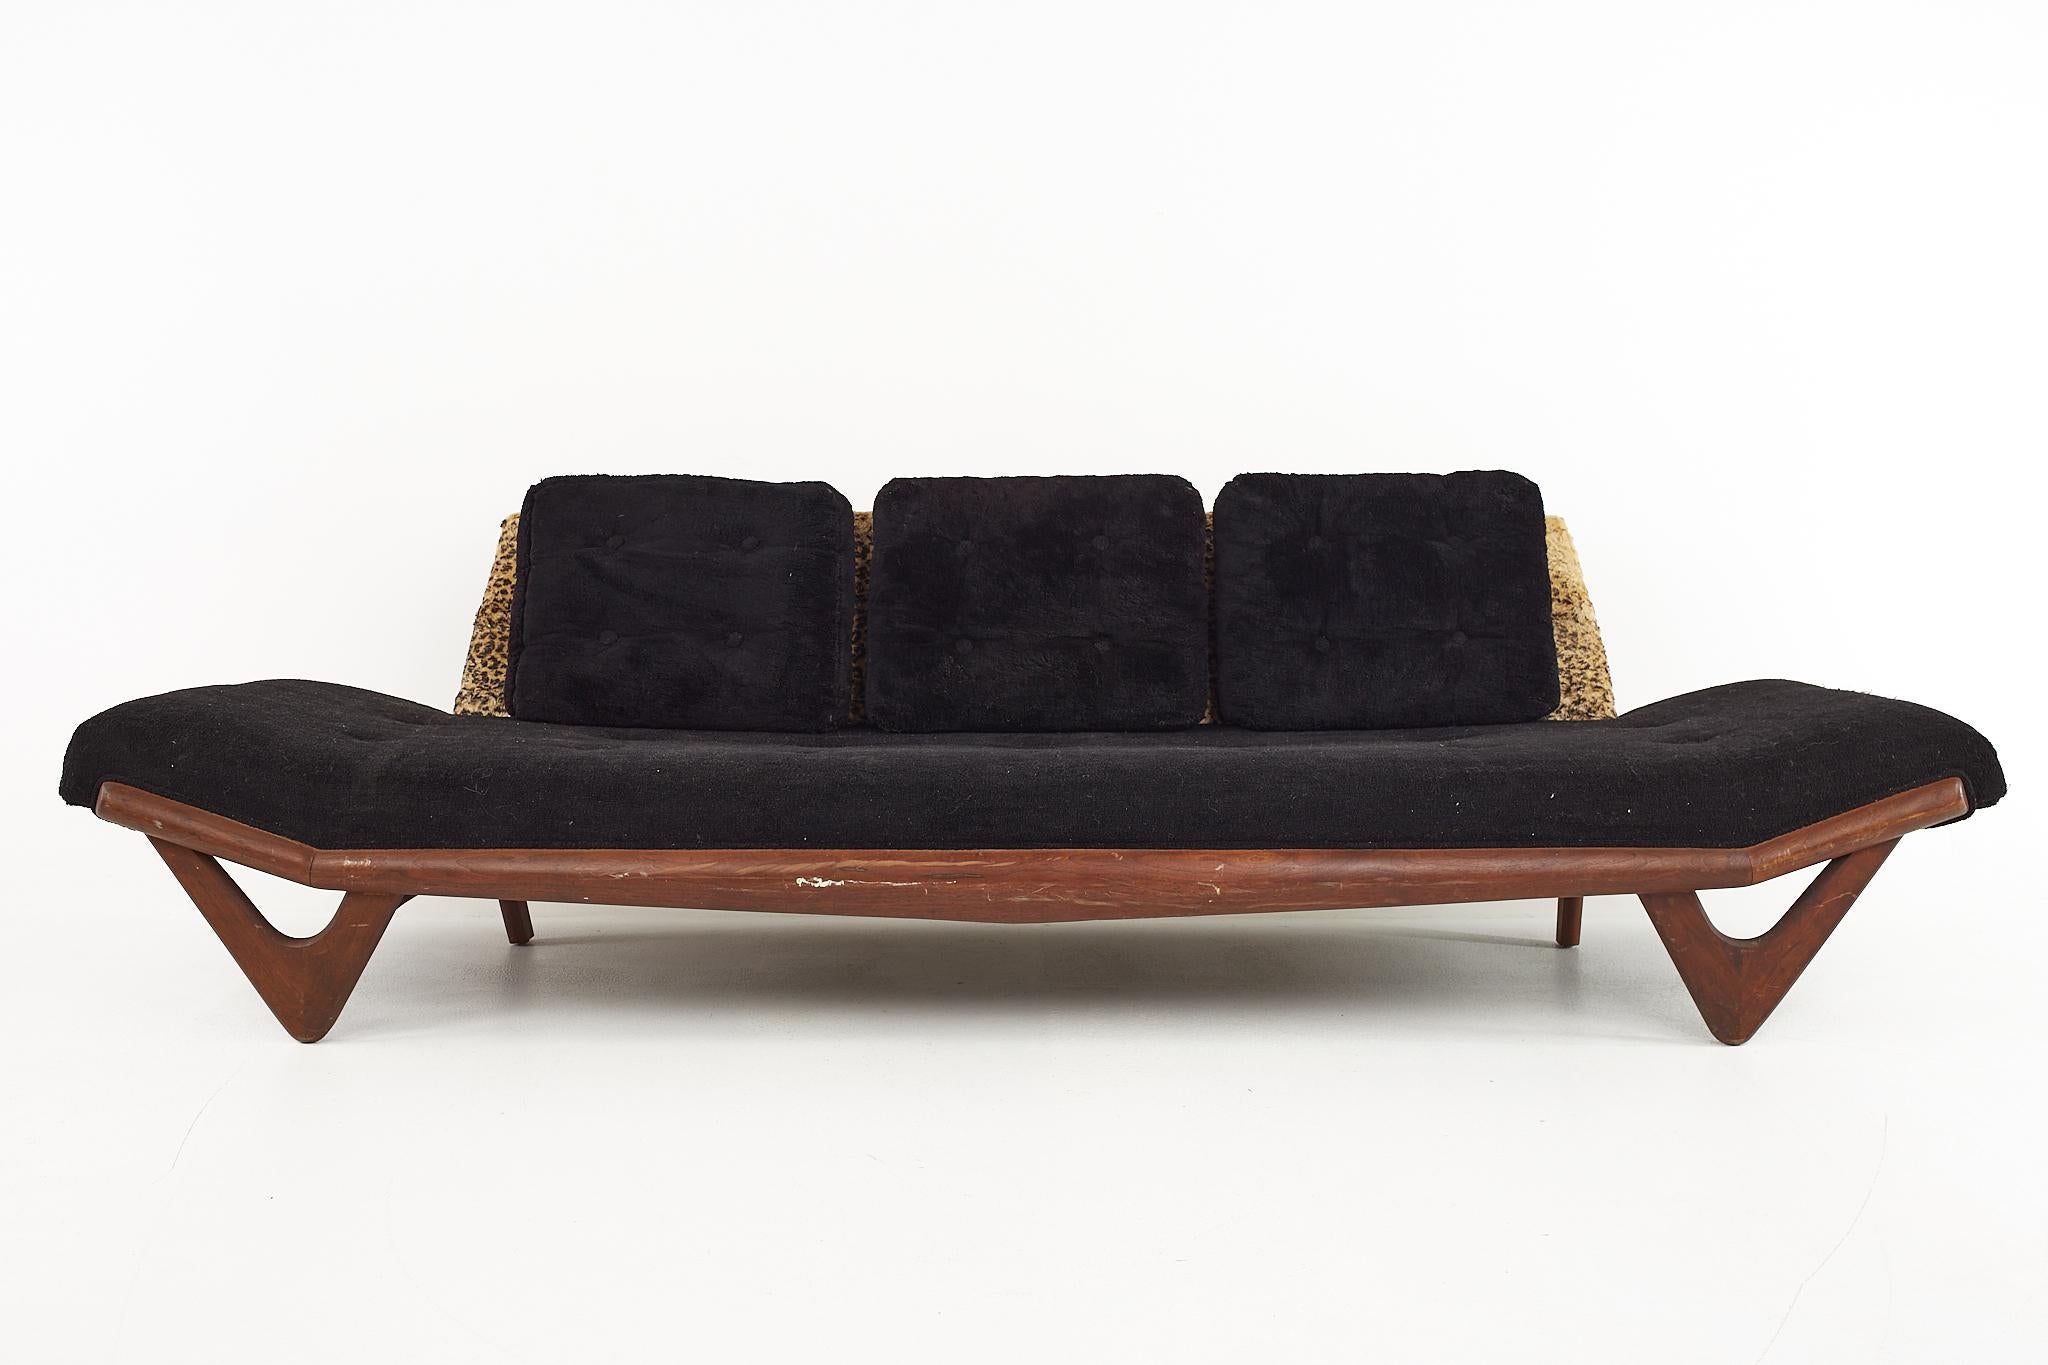 Adrian Pearsall Mid Century Walnut Gondola Sofa

The sofa measures: 103 wide x 33 deep x 27 high, with a seat height of 16 inches

All pieces of furniture can be had in what we call restored vintage condition. That means the piece is restored